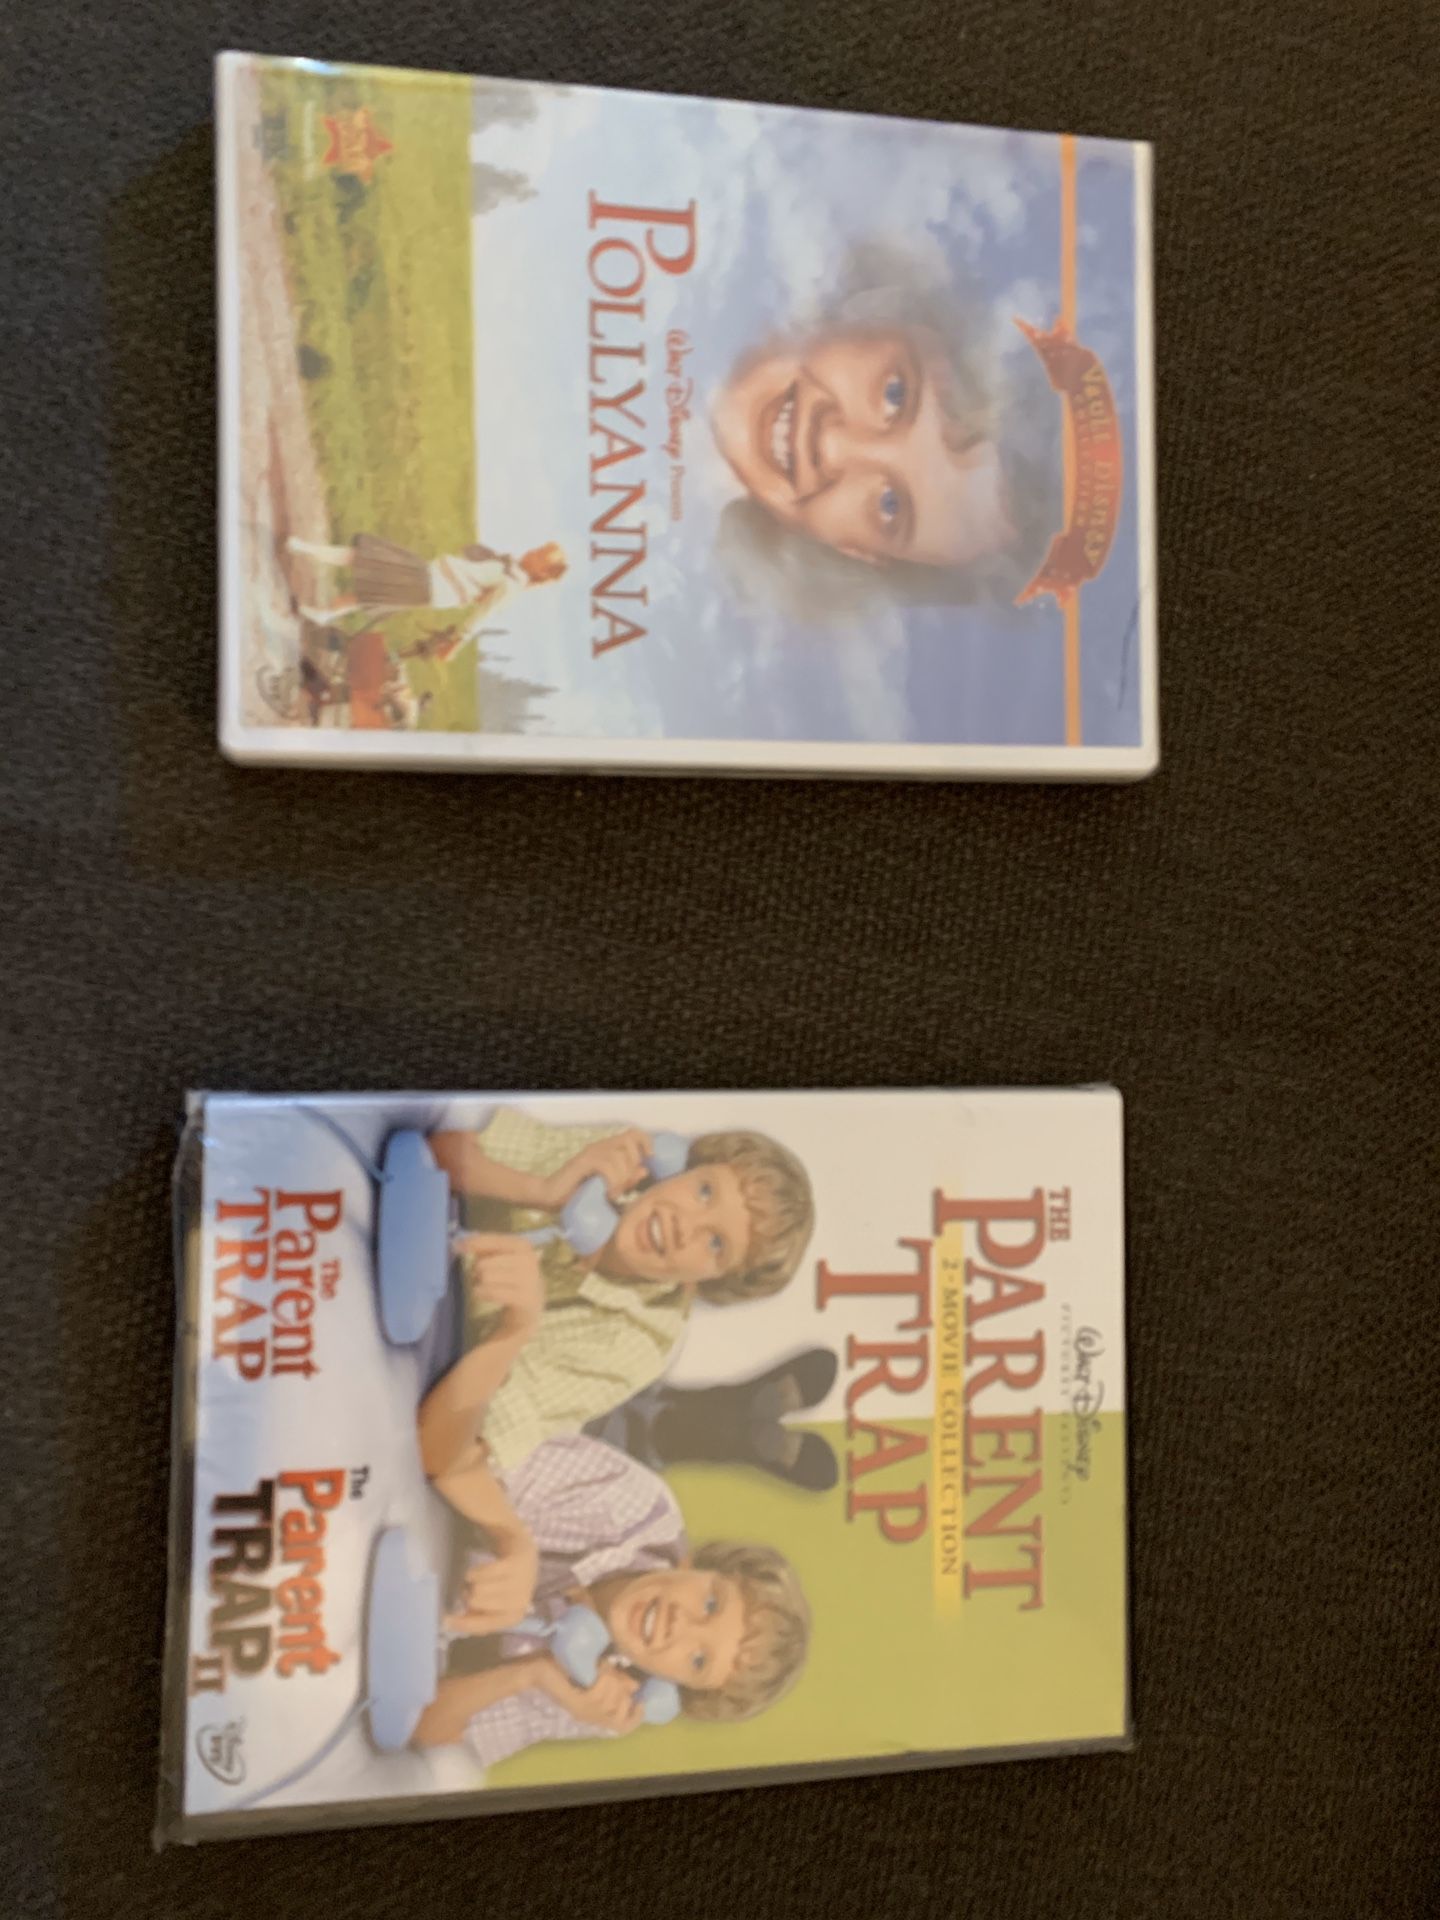 Parent trap and Pollyanna movie sealed new